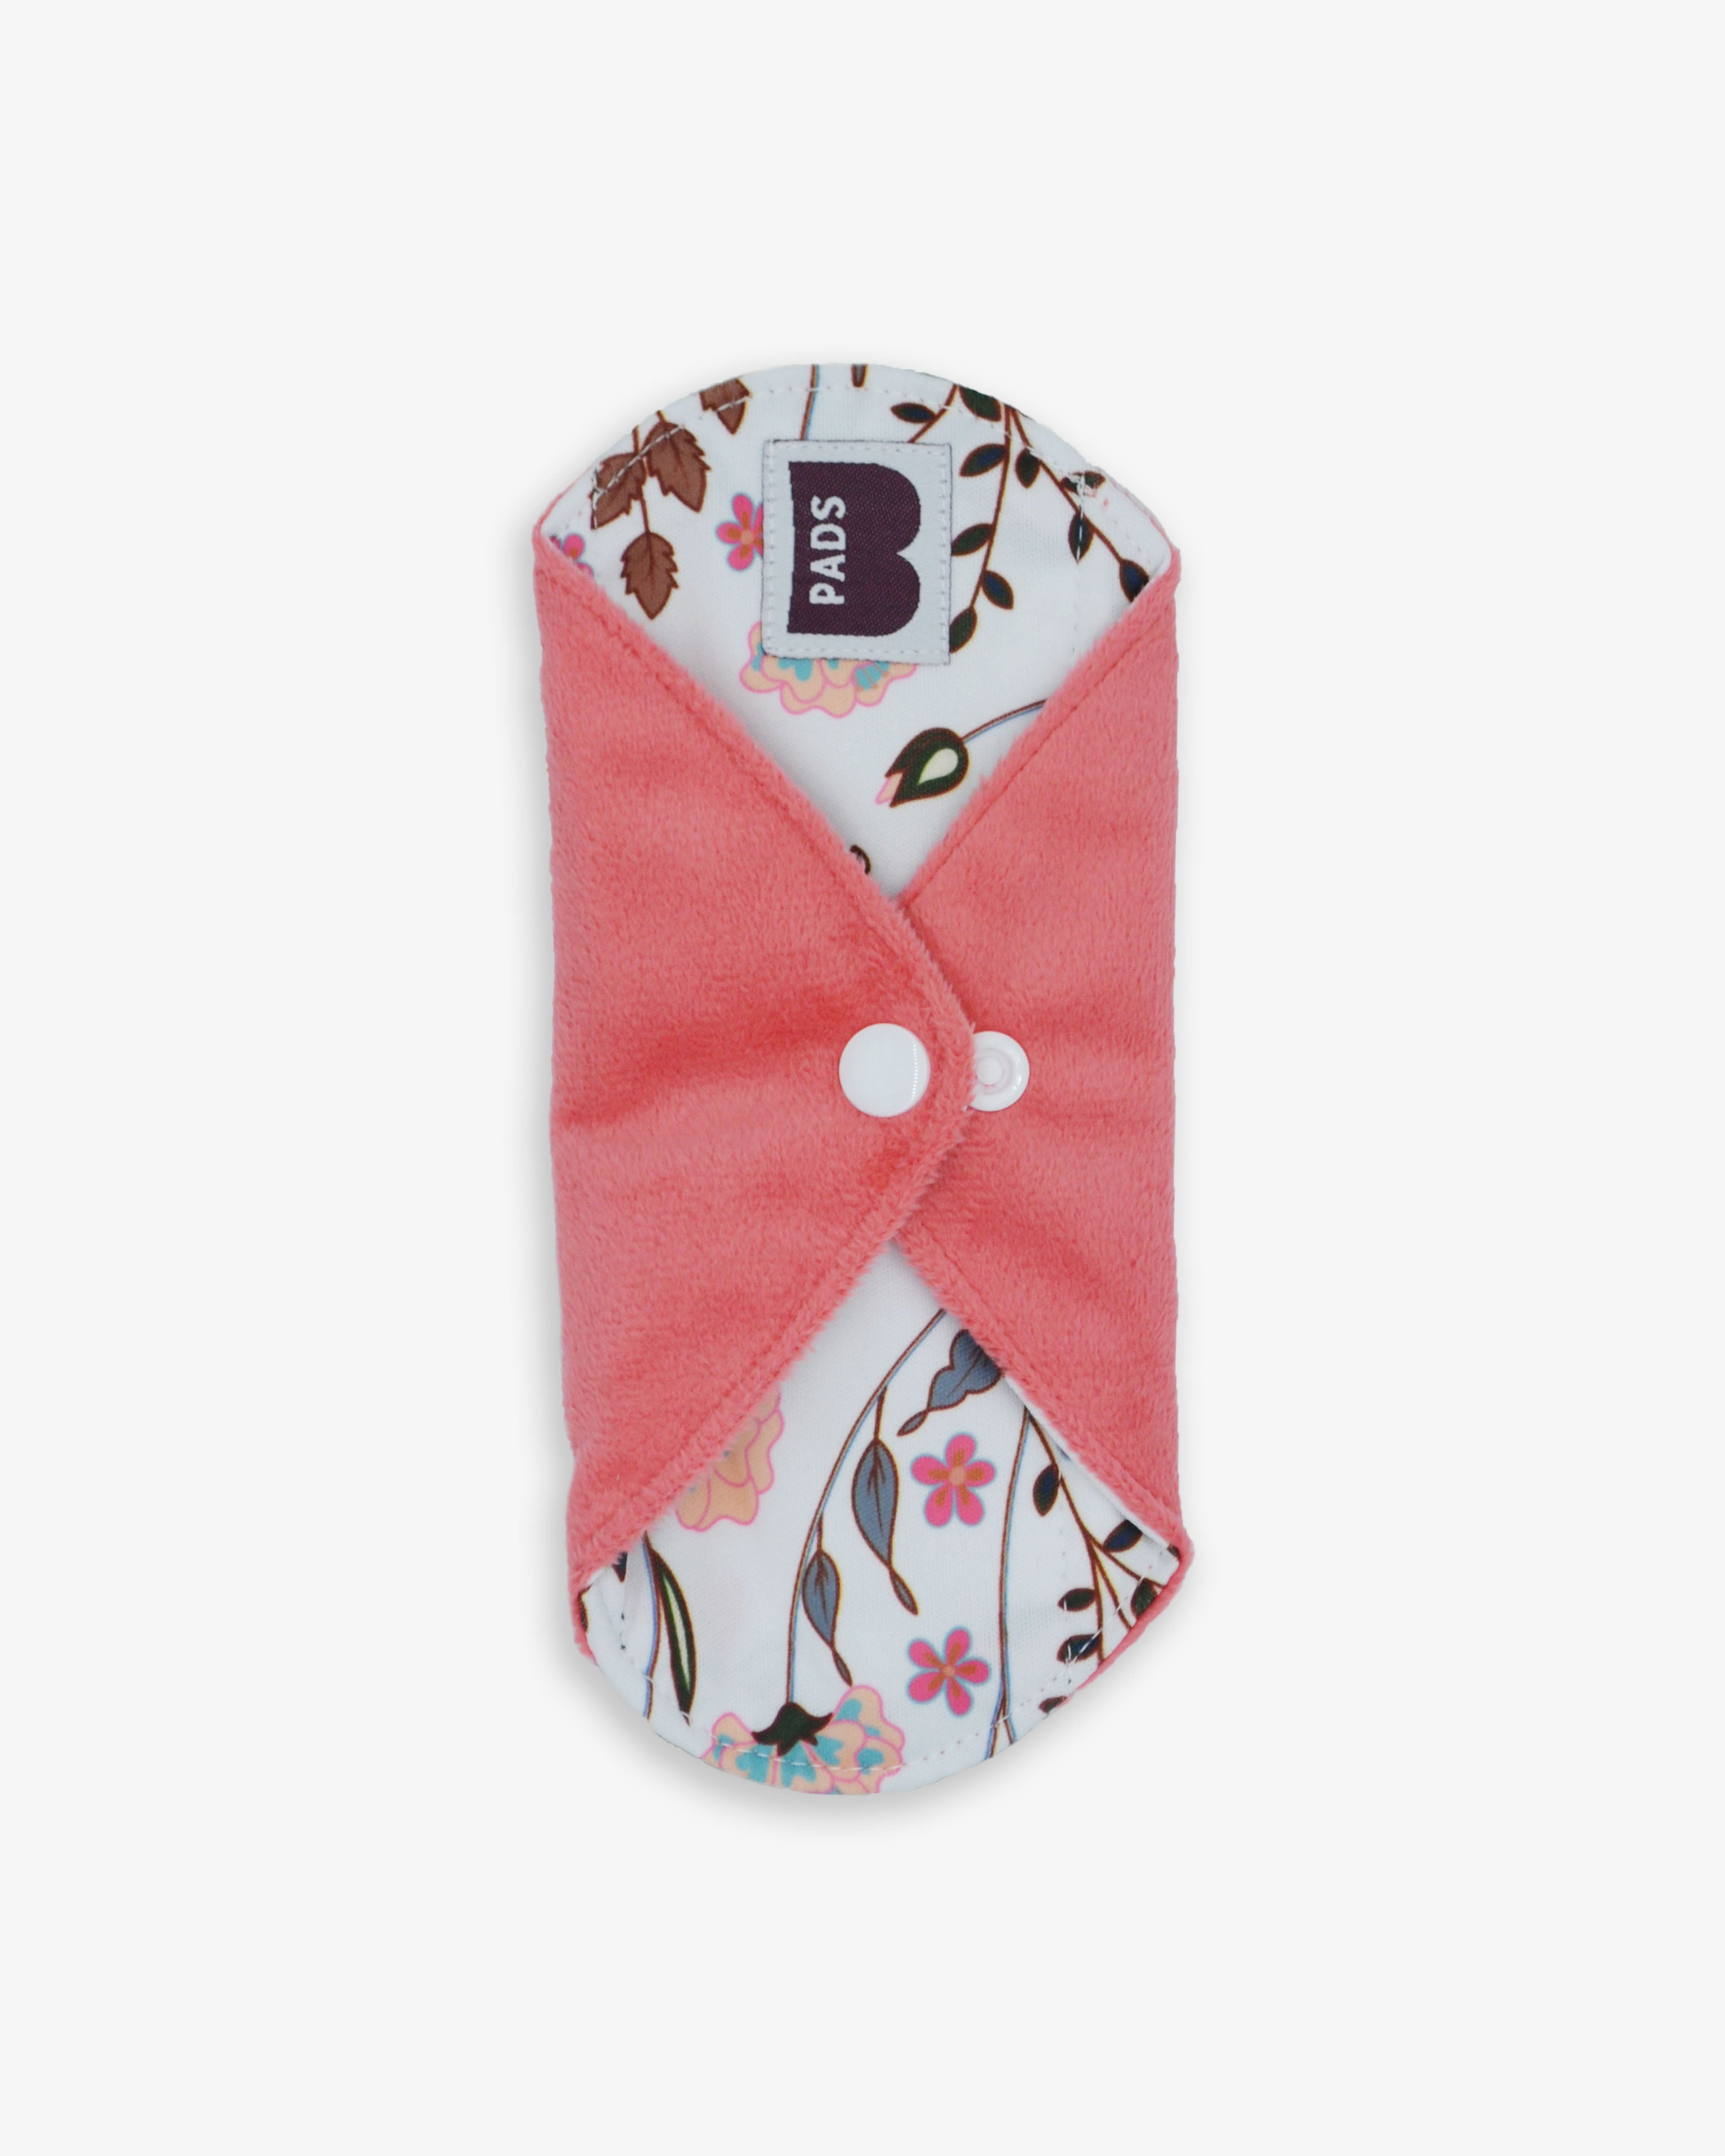 Washable Sanitary Pads - Floral